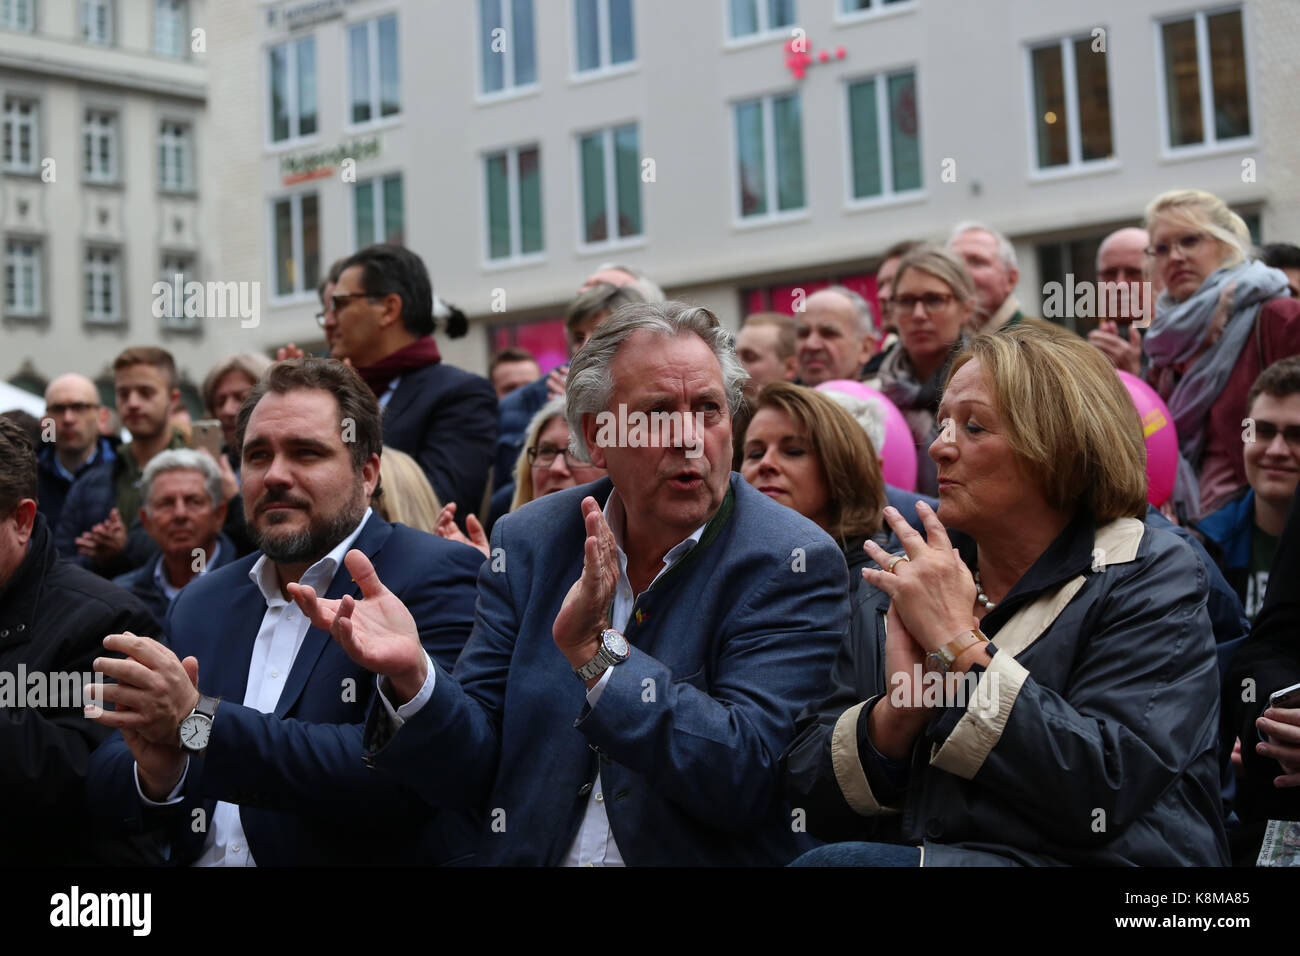 Munich, Germany. 19th Sep, 2017. Daniel Föst (l.), Albert Duin and Sabine Leutheusser-Schnarrenberger (r.) clapping. Credit: Alexander Pohl/Pacific Press/Alamy Live News Stock Photo